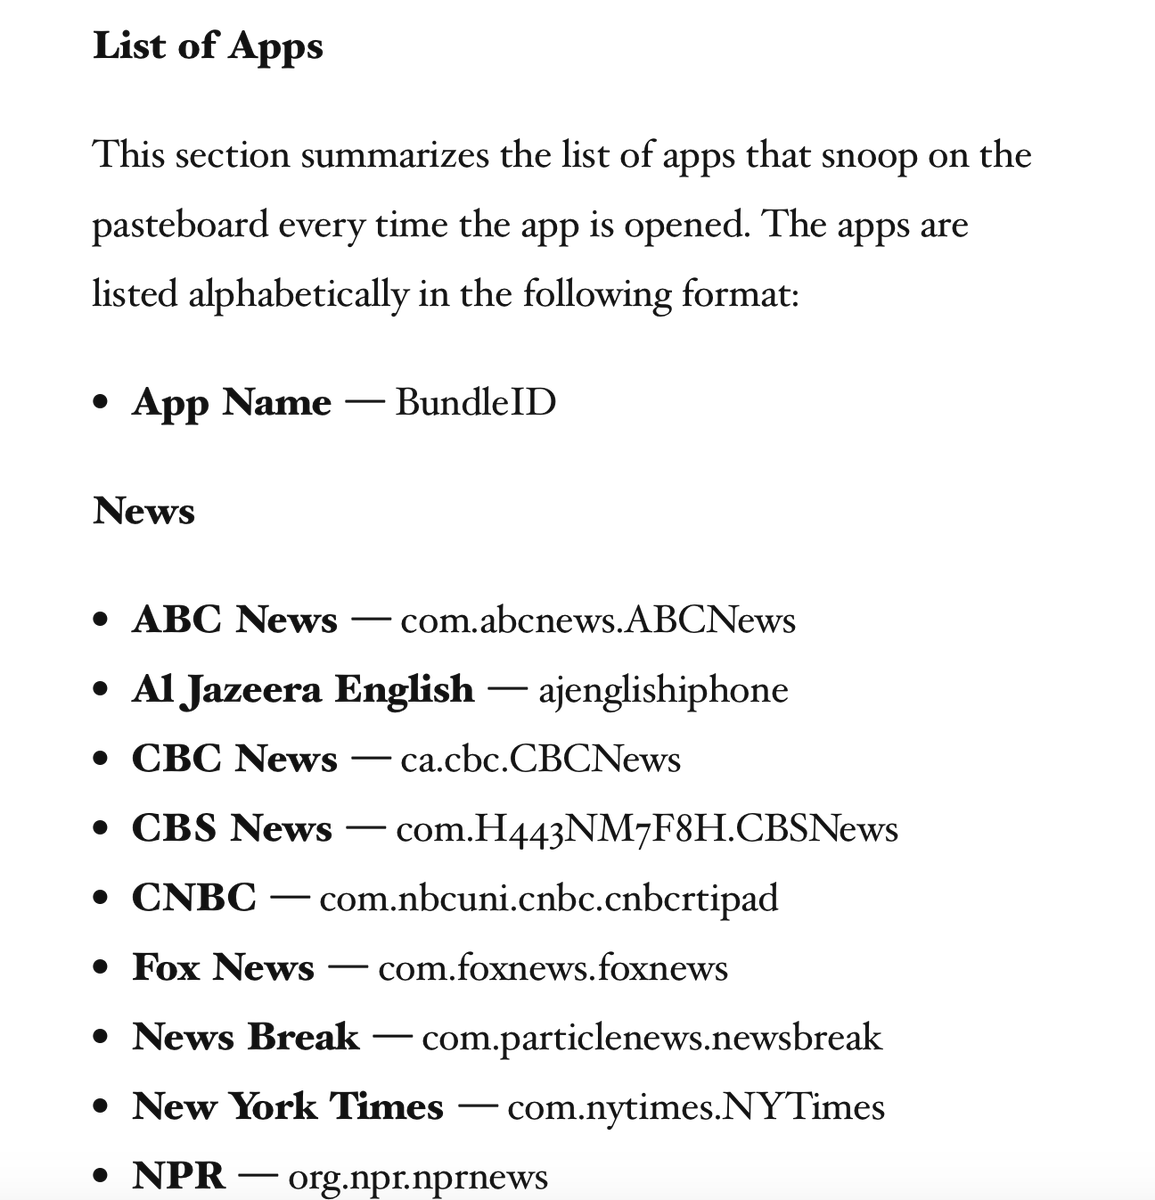 Original research about app access to clipboard data. It's not just TikTok, by a long shot  https://www.mysk.blog/2020/03/10/popular-iphone-and-ipad-apps-snooping-on-the-pasteboard/